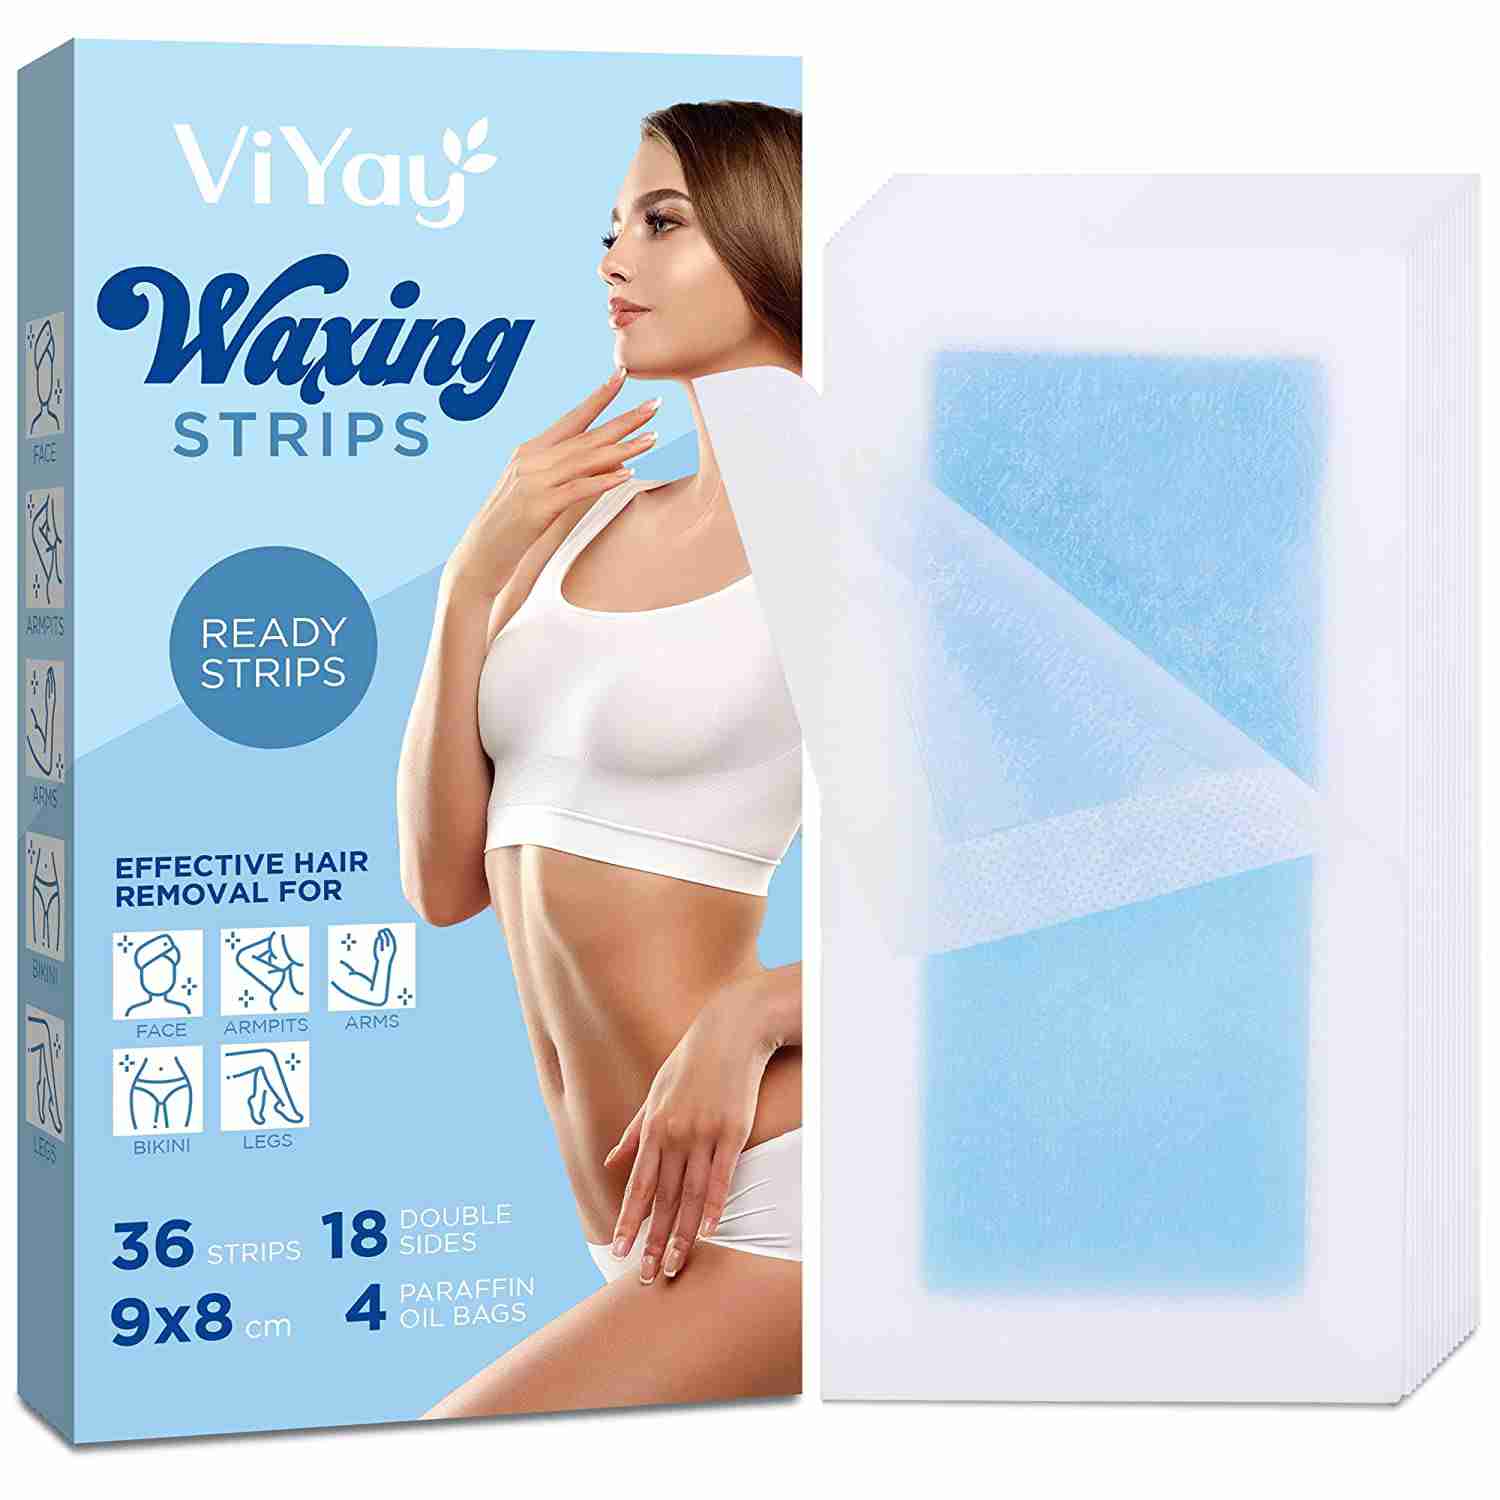 waxing-strips-body-hair-removal with cash back rebate